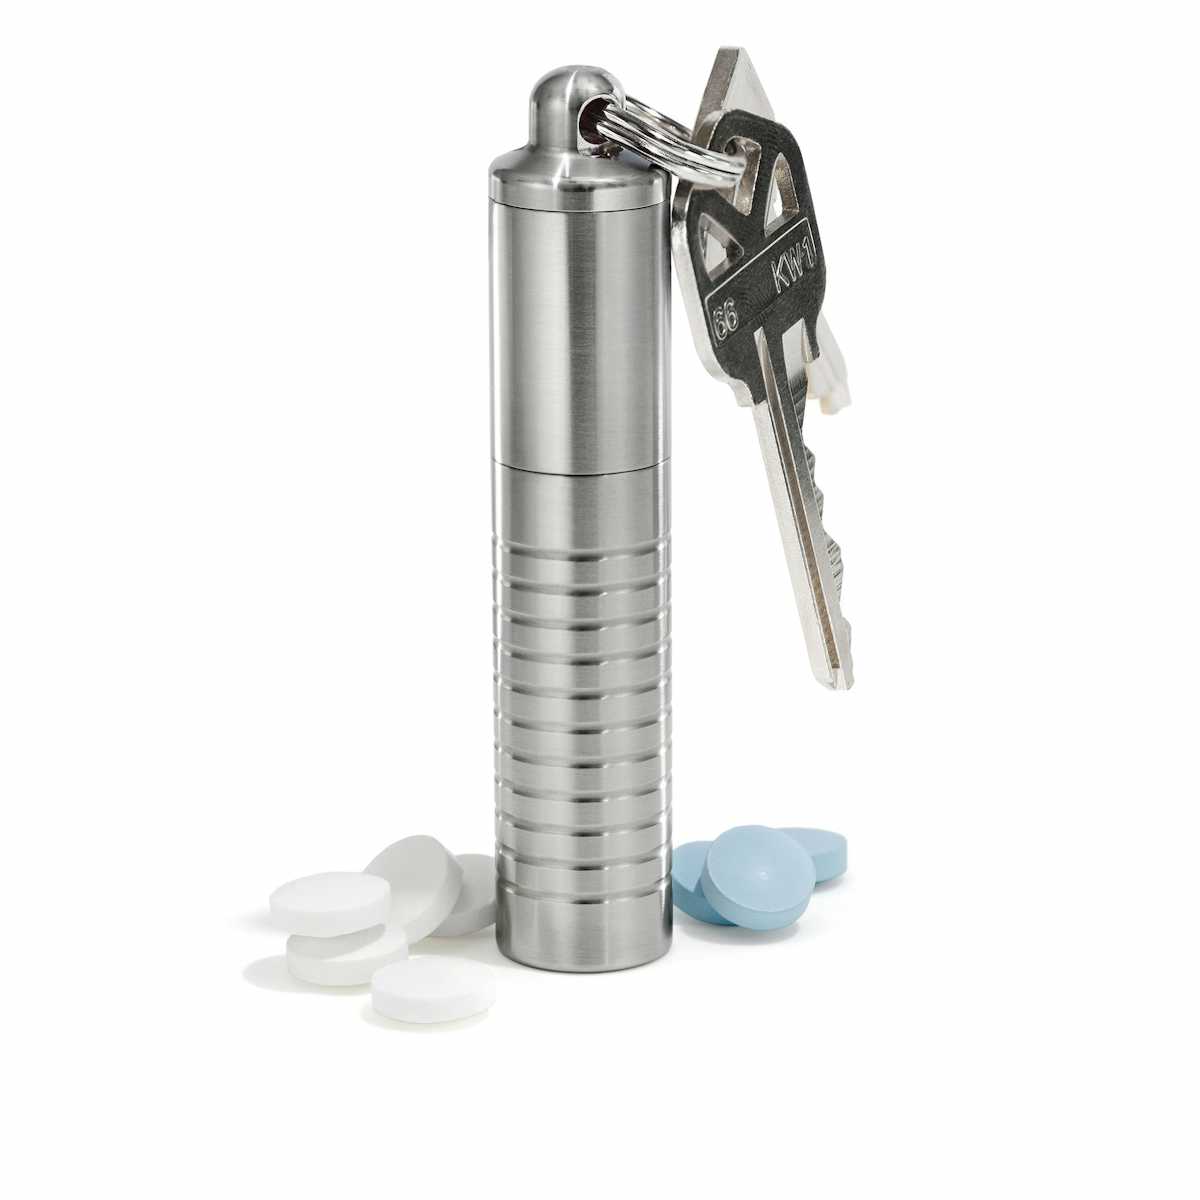  Cielo Pill Holders - Slim Single Chamber Keychain Pill Holder,  Stainless Steel Pill Keychain Container, Waterproof Pill Case, Compact with  Customizable Chambers, Stores 9 Aspirin-Sized Tablets : Health & Household